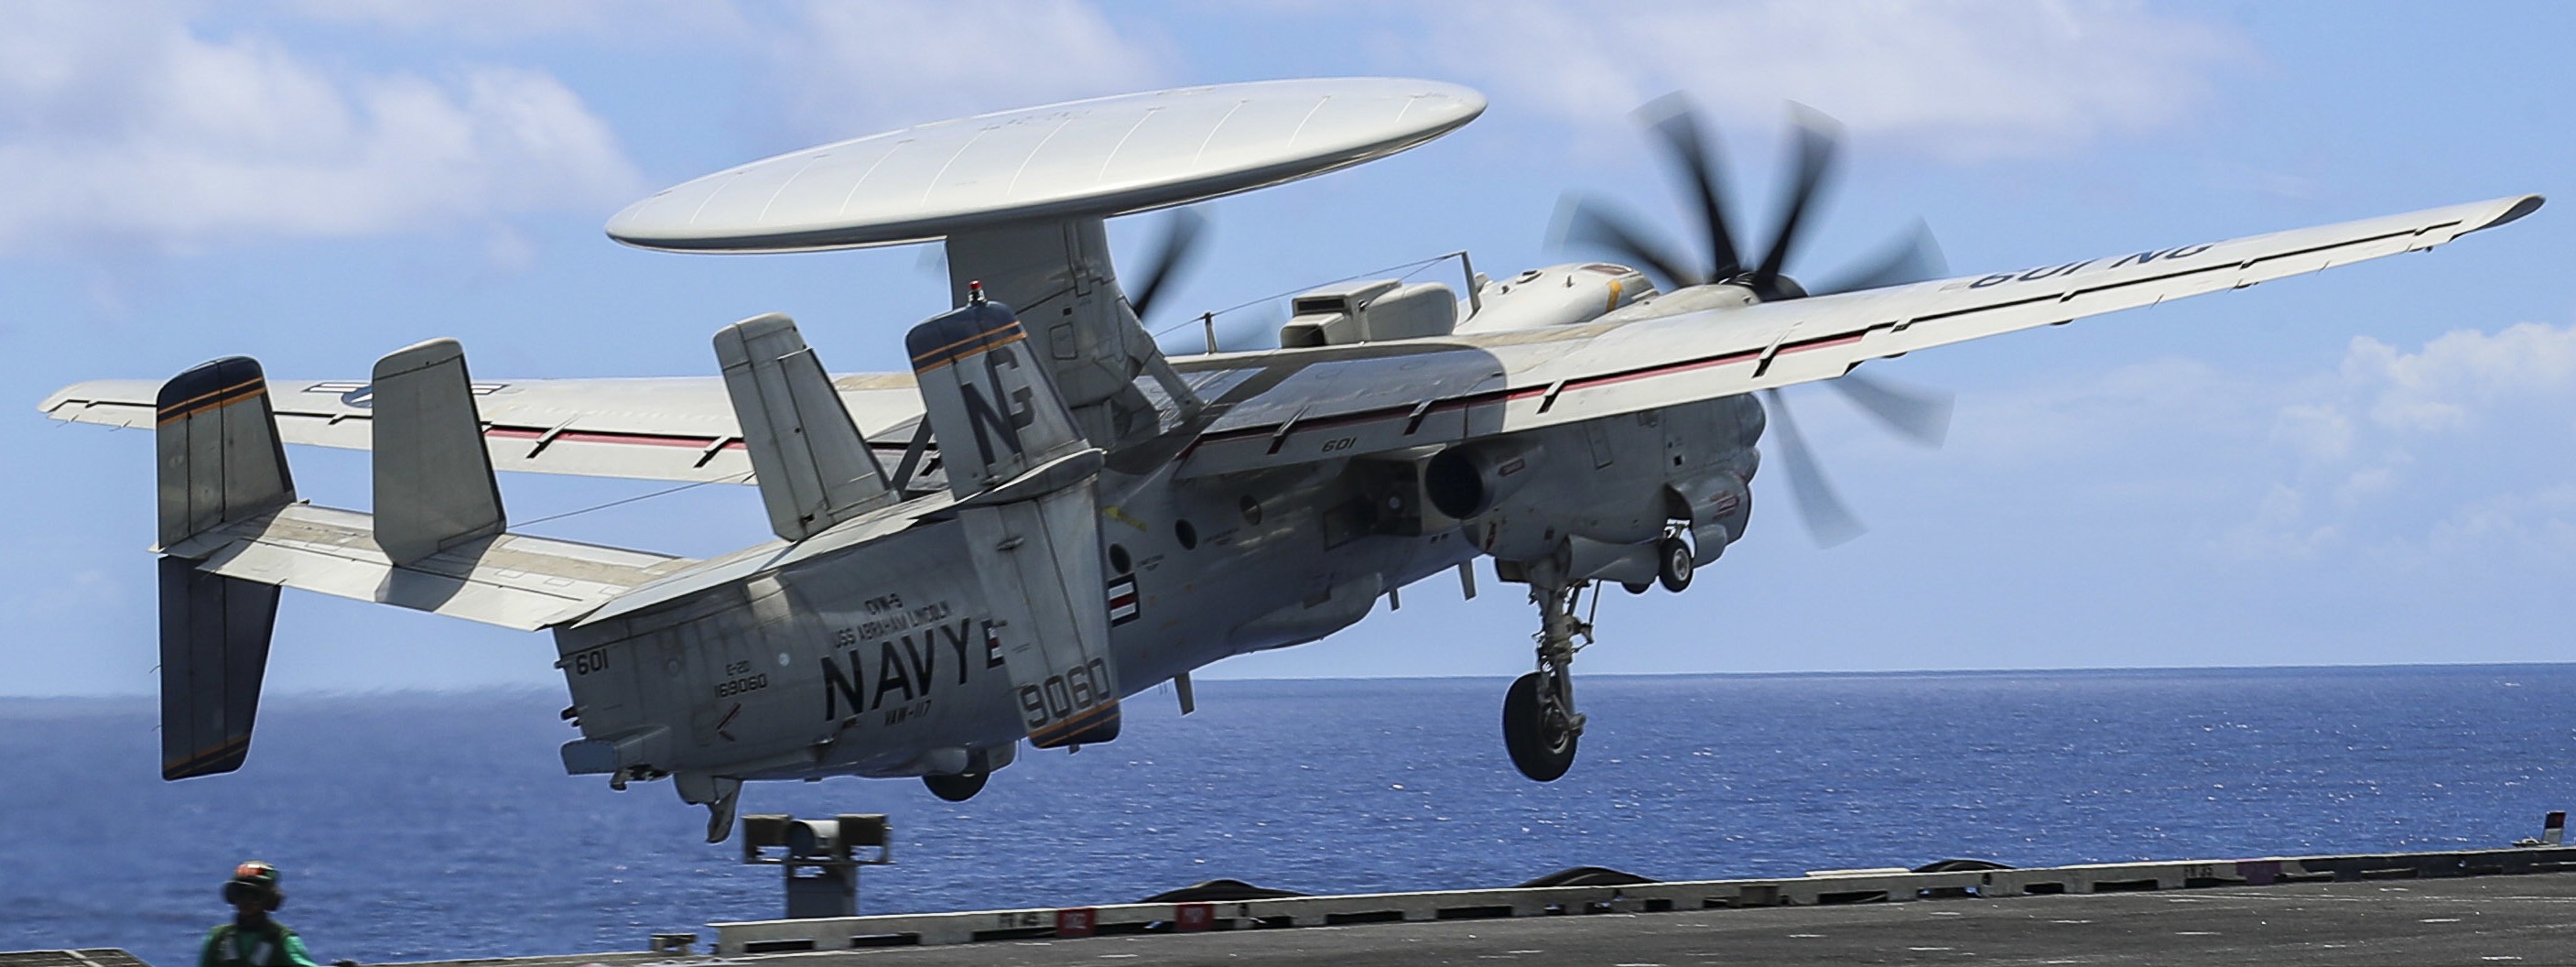 vaw-117 wallbangers airborne command and control squadron navy e-2d hawkeye cvw-9 uss abraham lincoln cvn-72 15